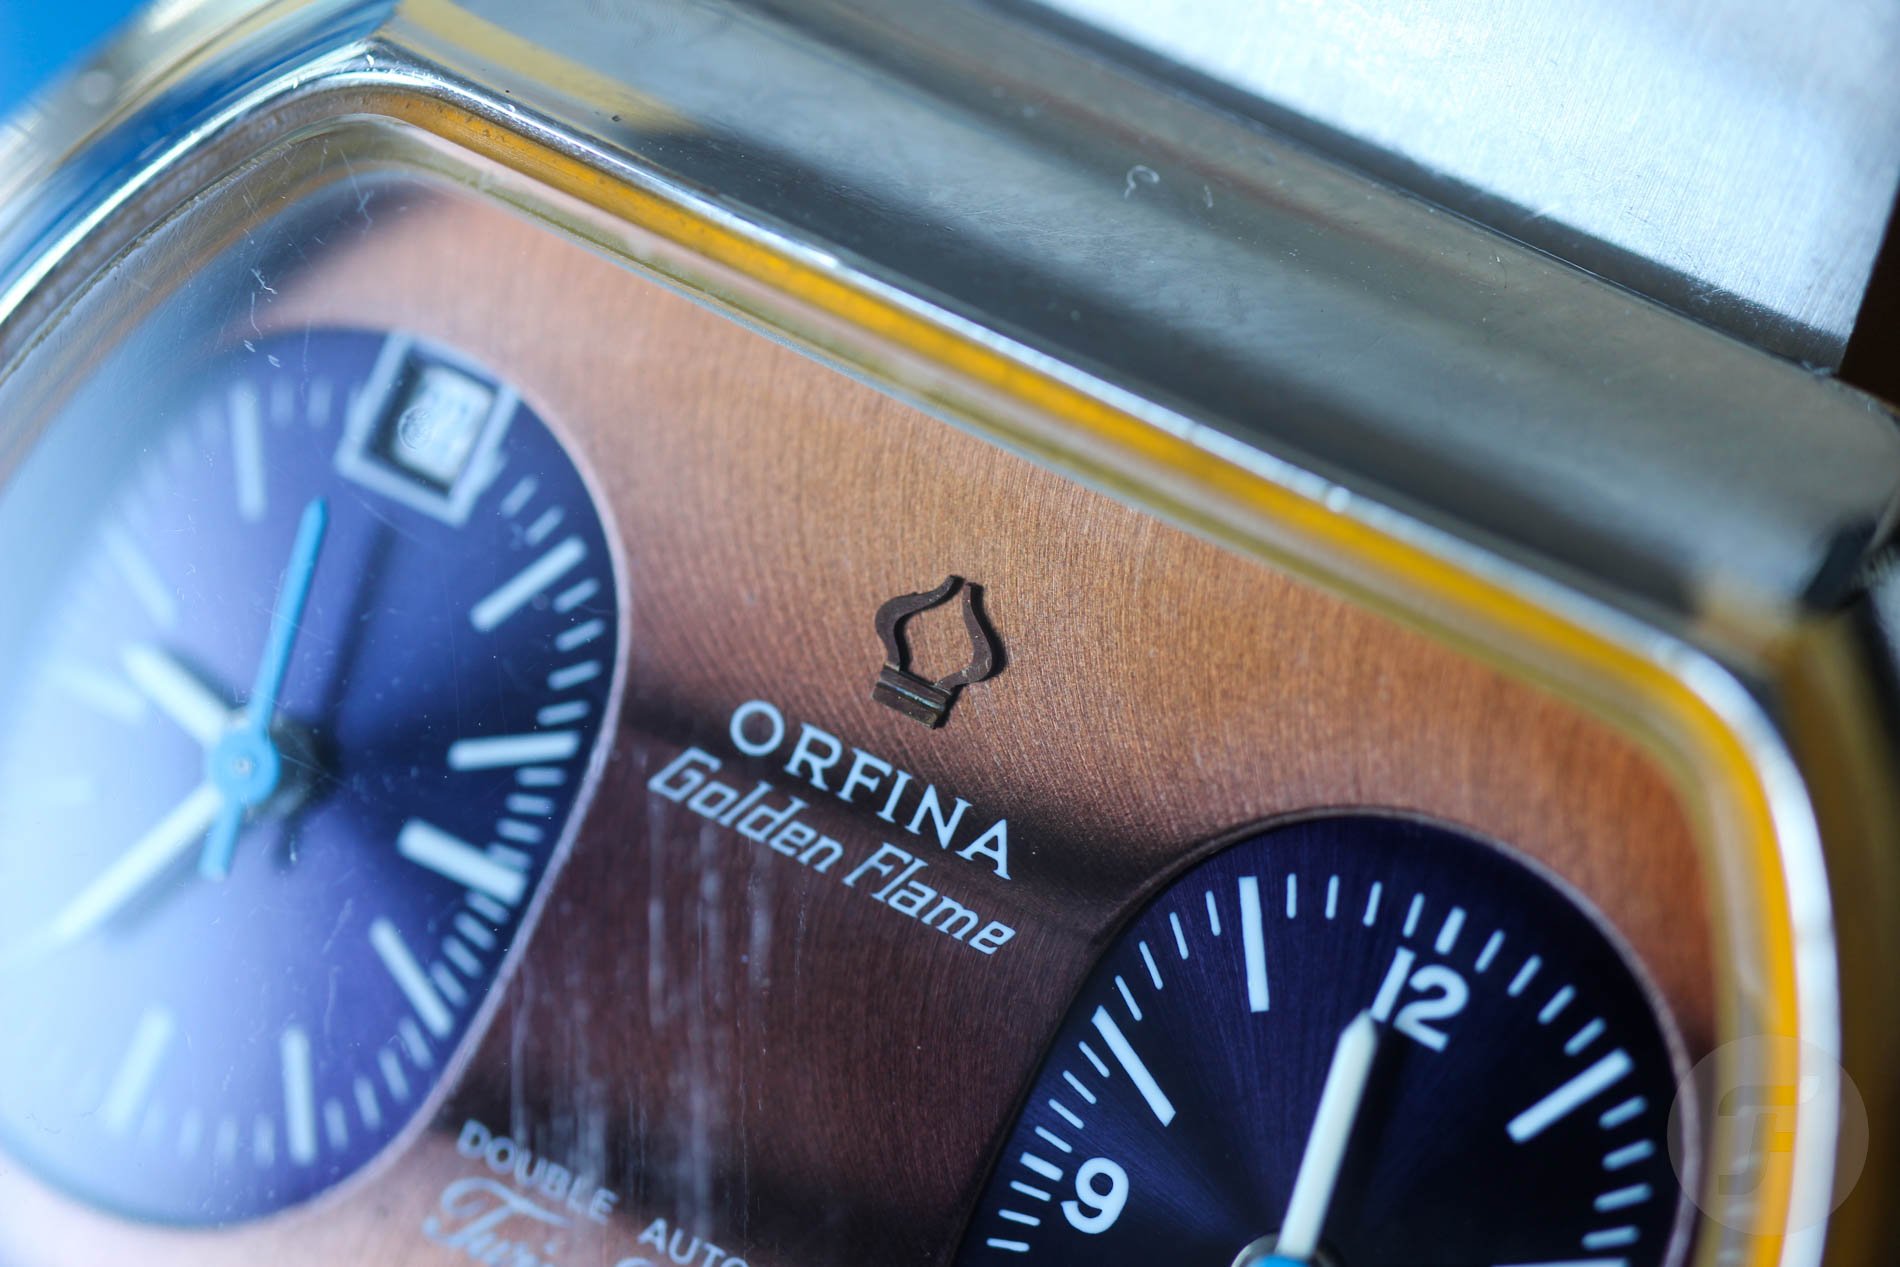 Orfina Golden Flame Double Automatic Twin Special close-up